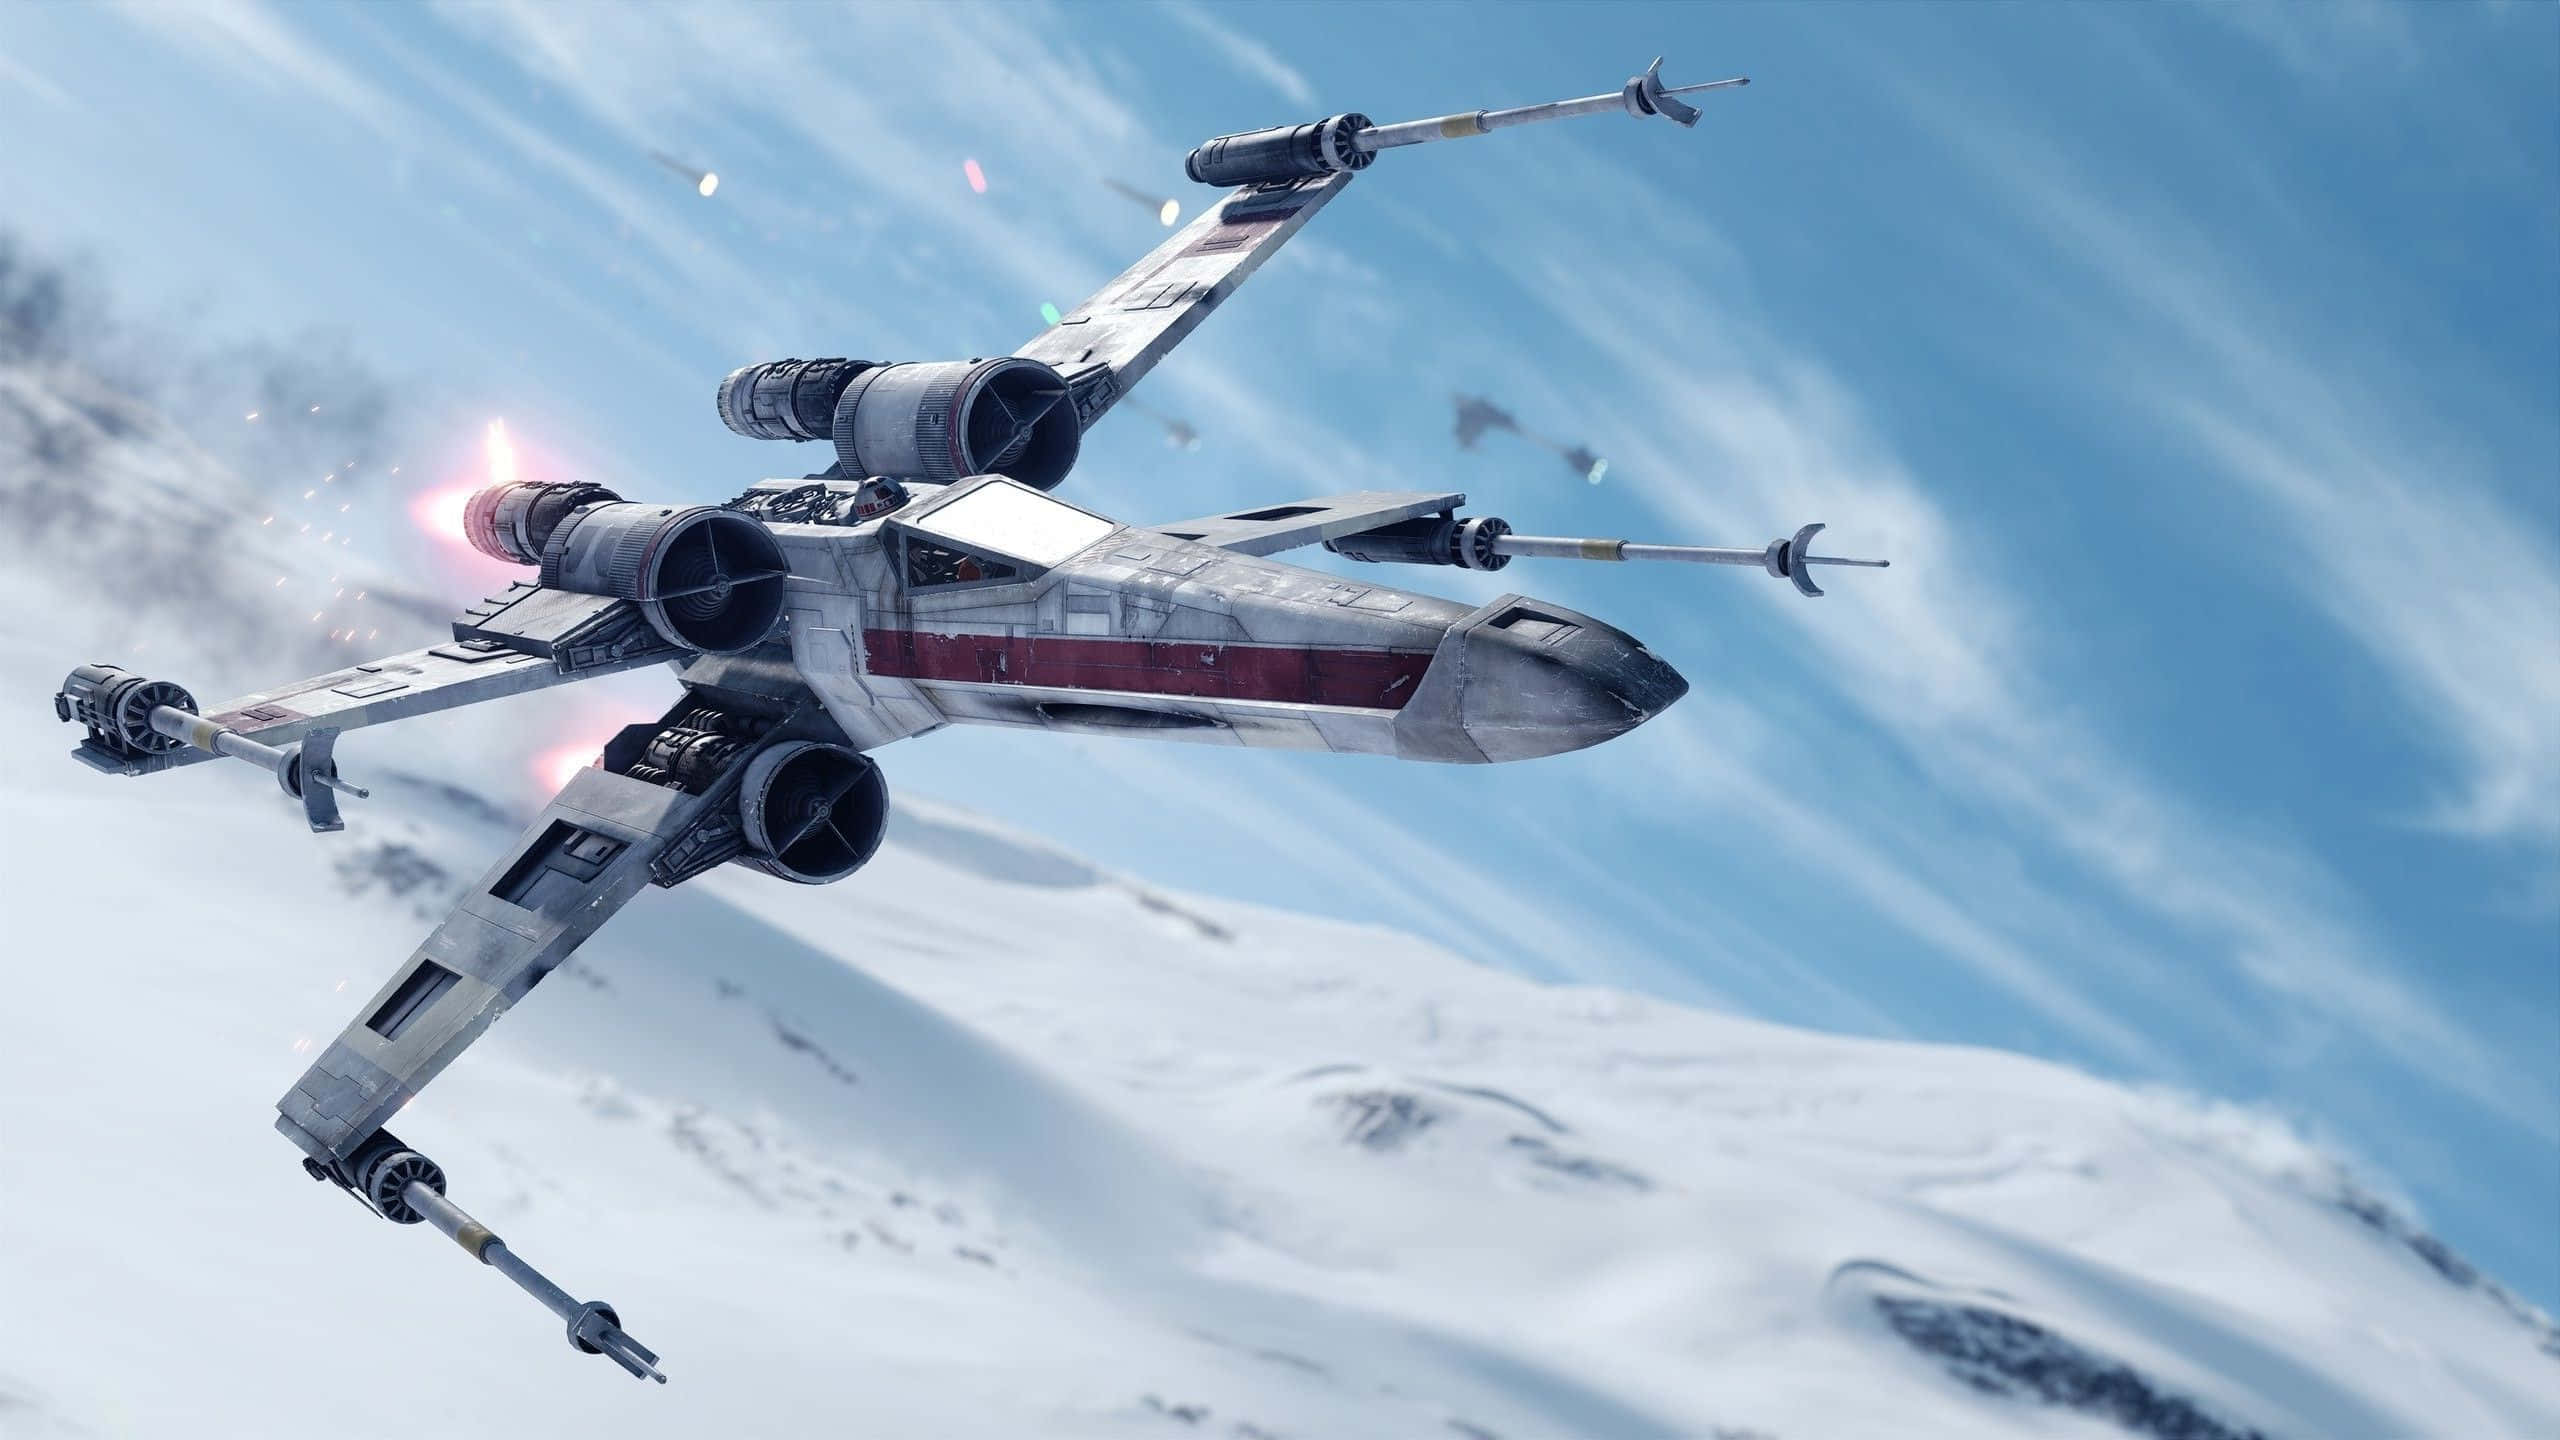 The X-wing Fighter Shines in the Midday Sun" Wallpaper